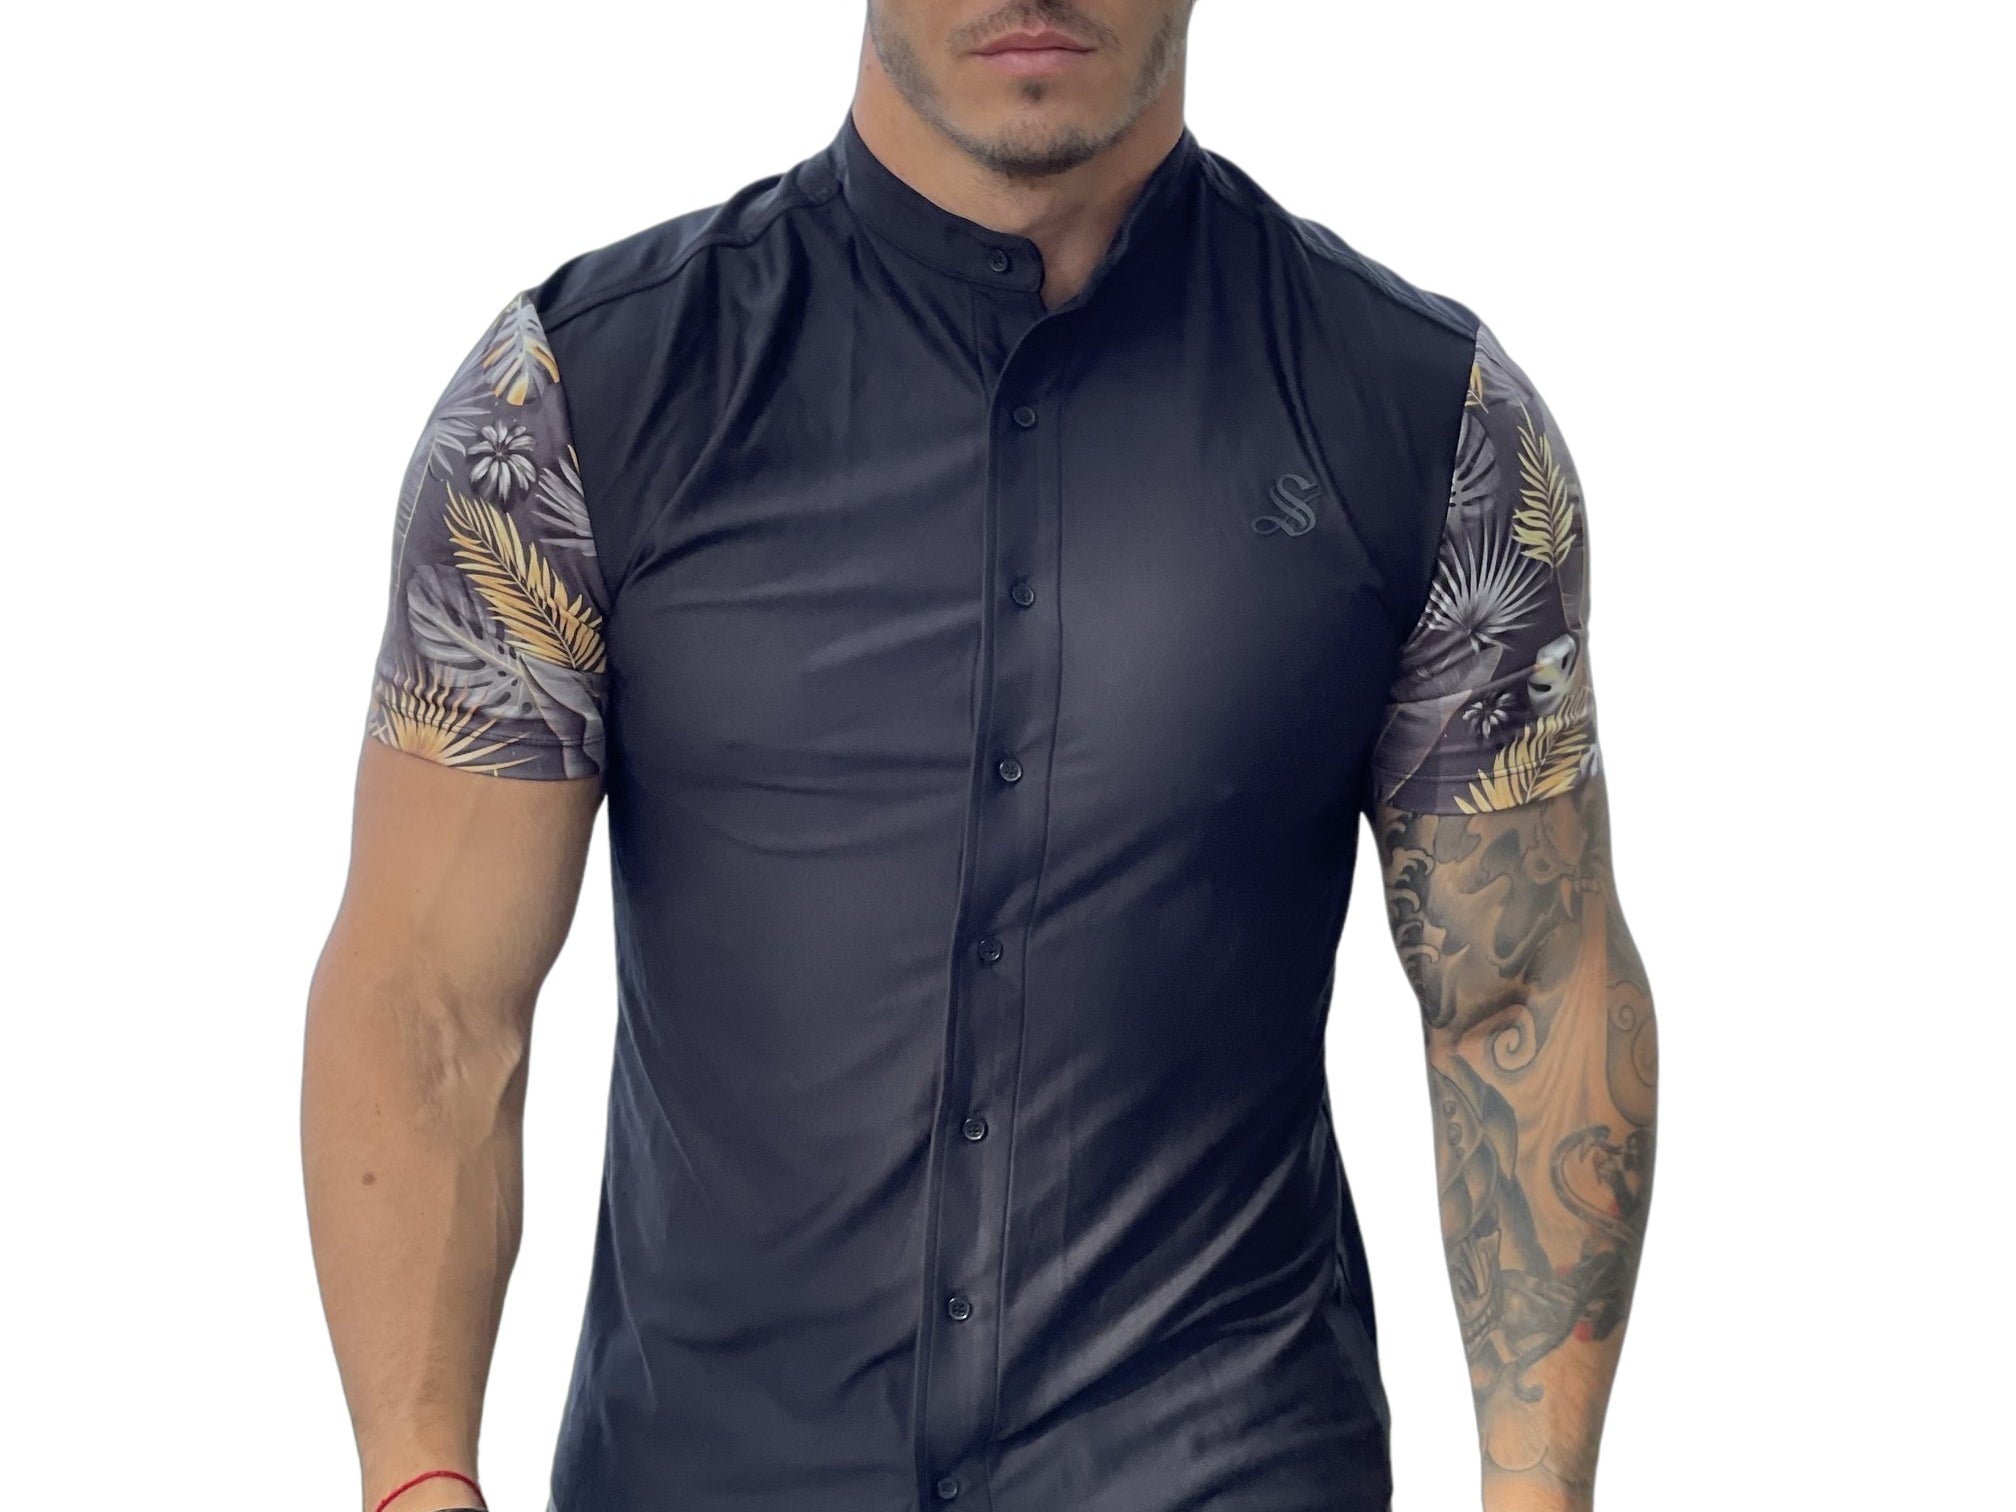 Tropican - Black Shirt for Men (PRE-ORDER DISPATCH DATE 1 JULY 2022) - Sarman Fashion - Wholesale Clothing Fashion Brand for Men from Canada